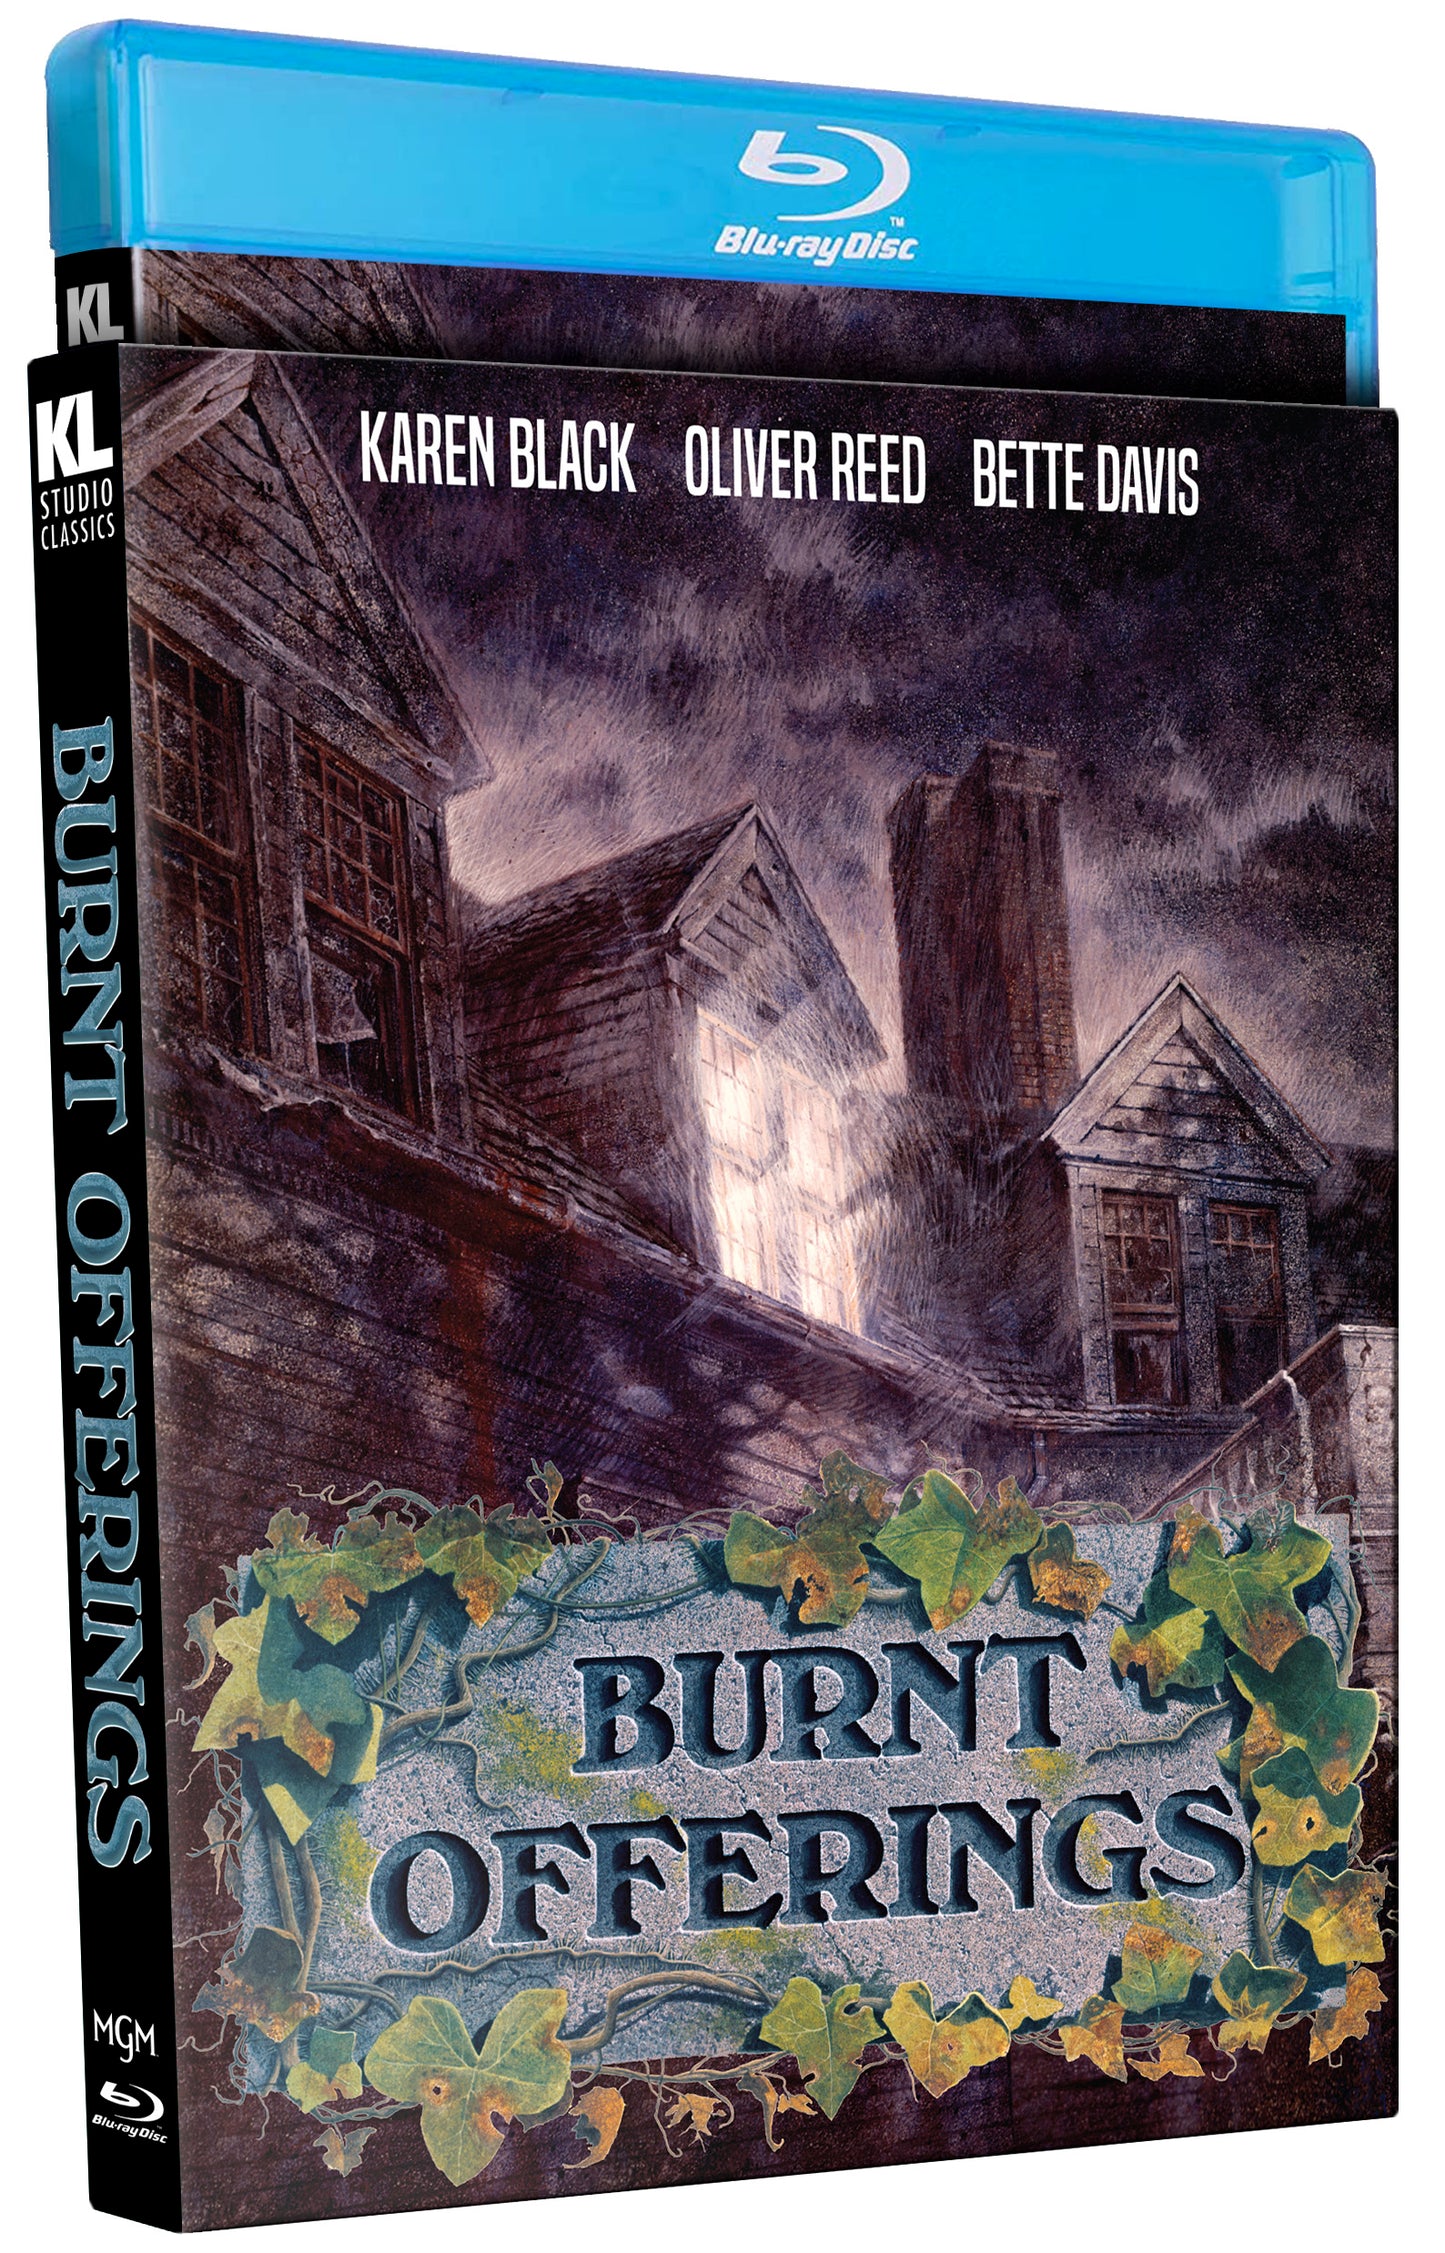 Burnt Offerings Special Edition Blu-ray with Slipcover (Kino Lorber)